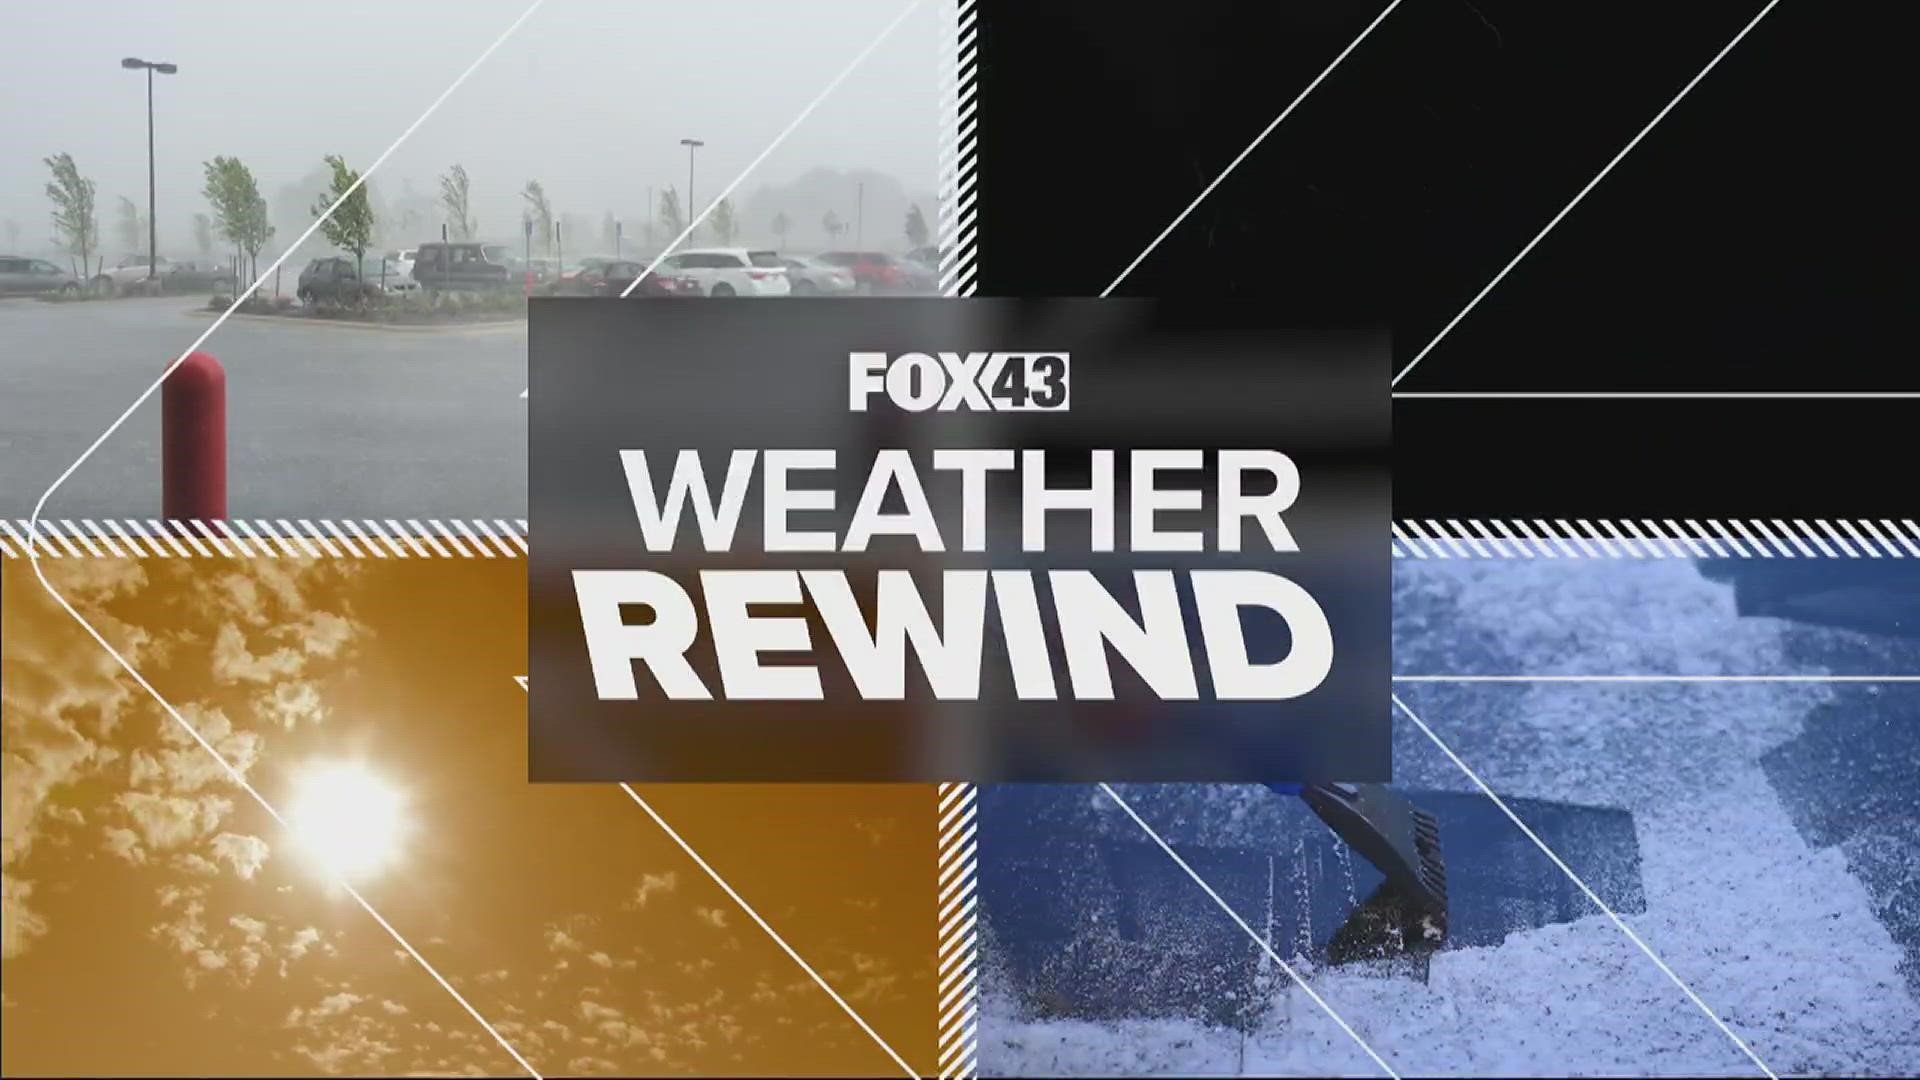 In this week's Weather Rewind, we look at severe flooding in Peru earlier in the week. Then, we bring it back to Pa. for a look at the causes of springtime flooding.